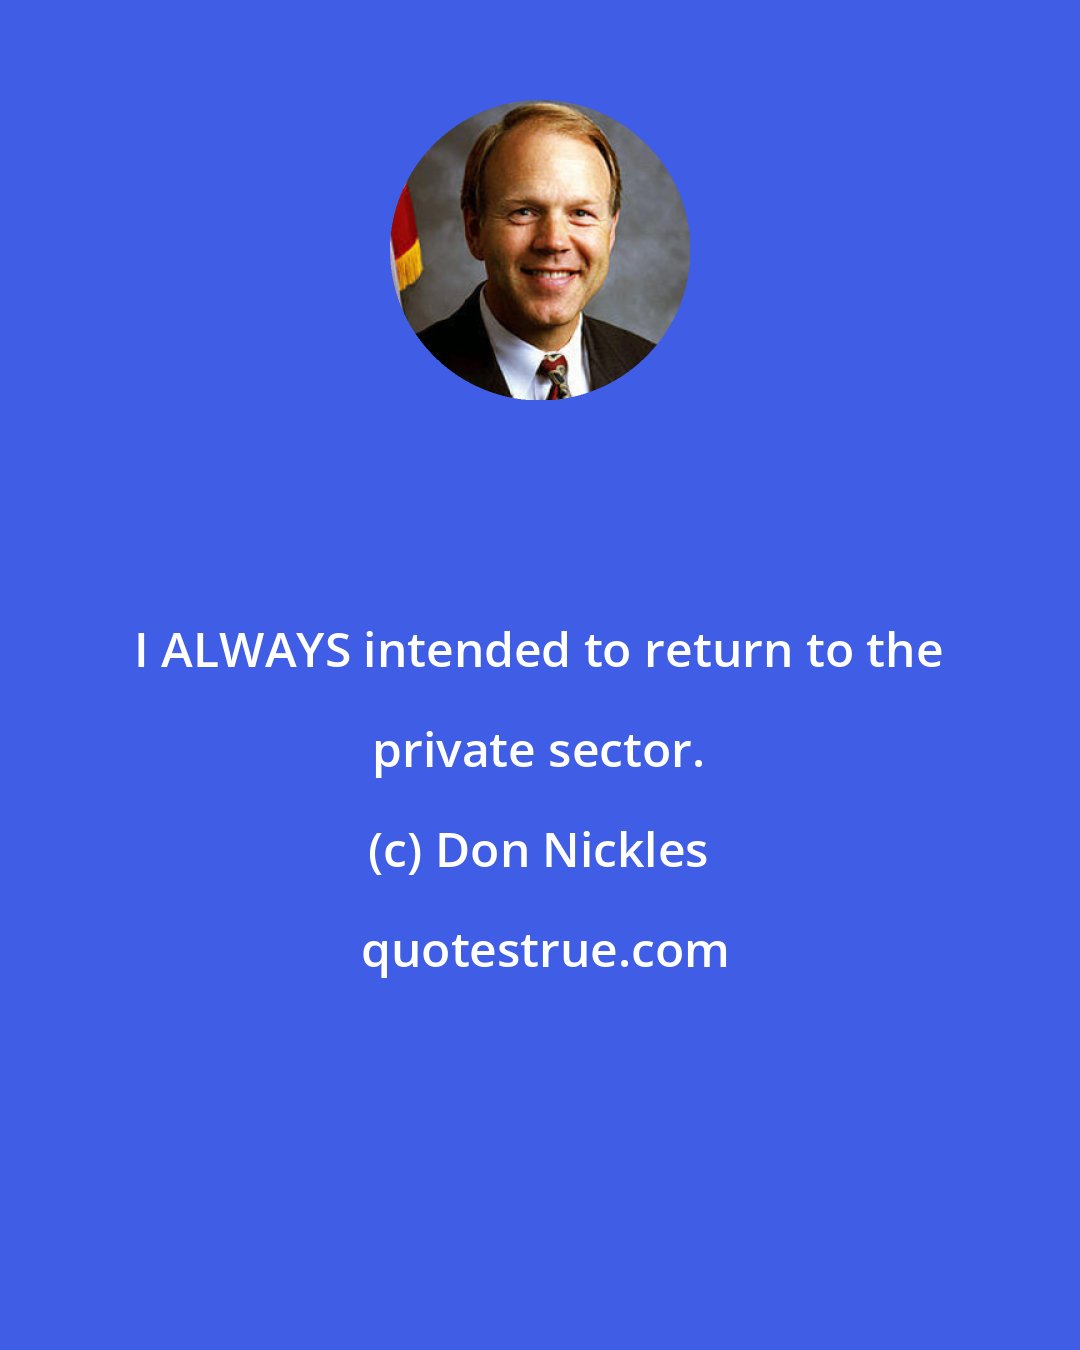 Don Nickles: I ALWAYS intended to return to the private sector.